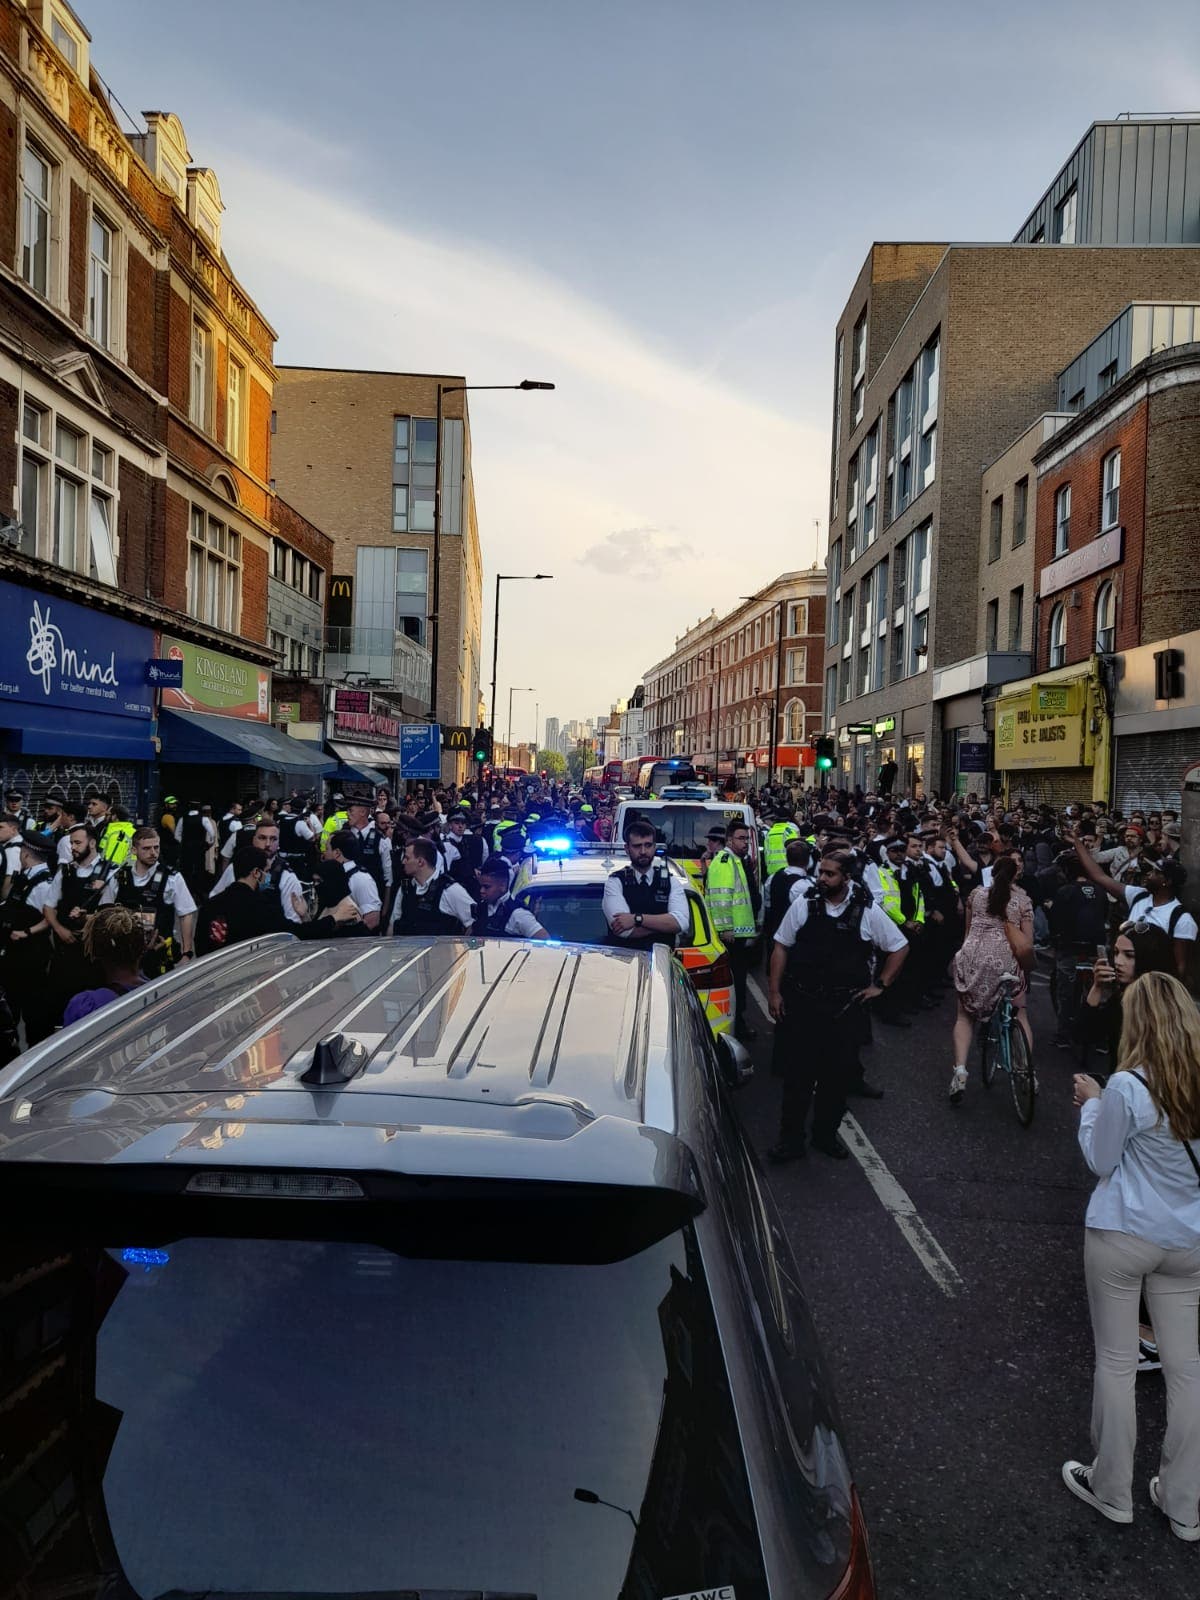 Police clash with Dalston locals as officers arrest man on ‘immigration offences’